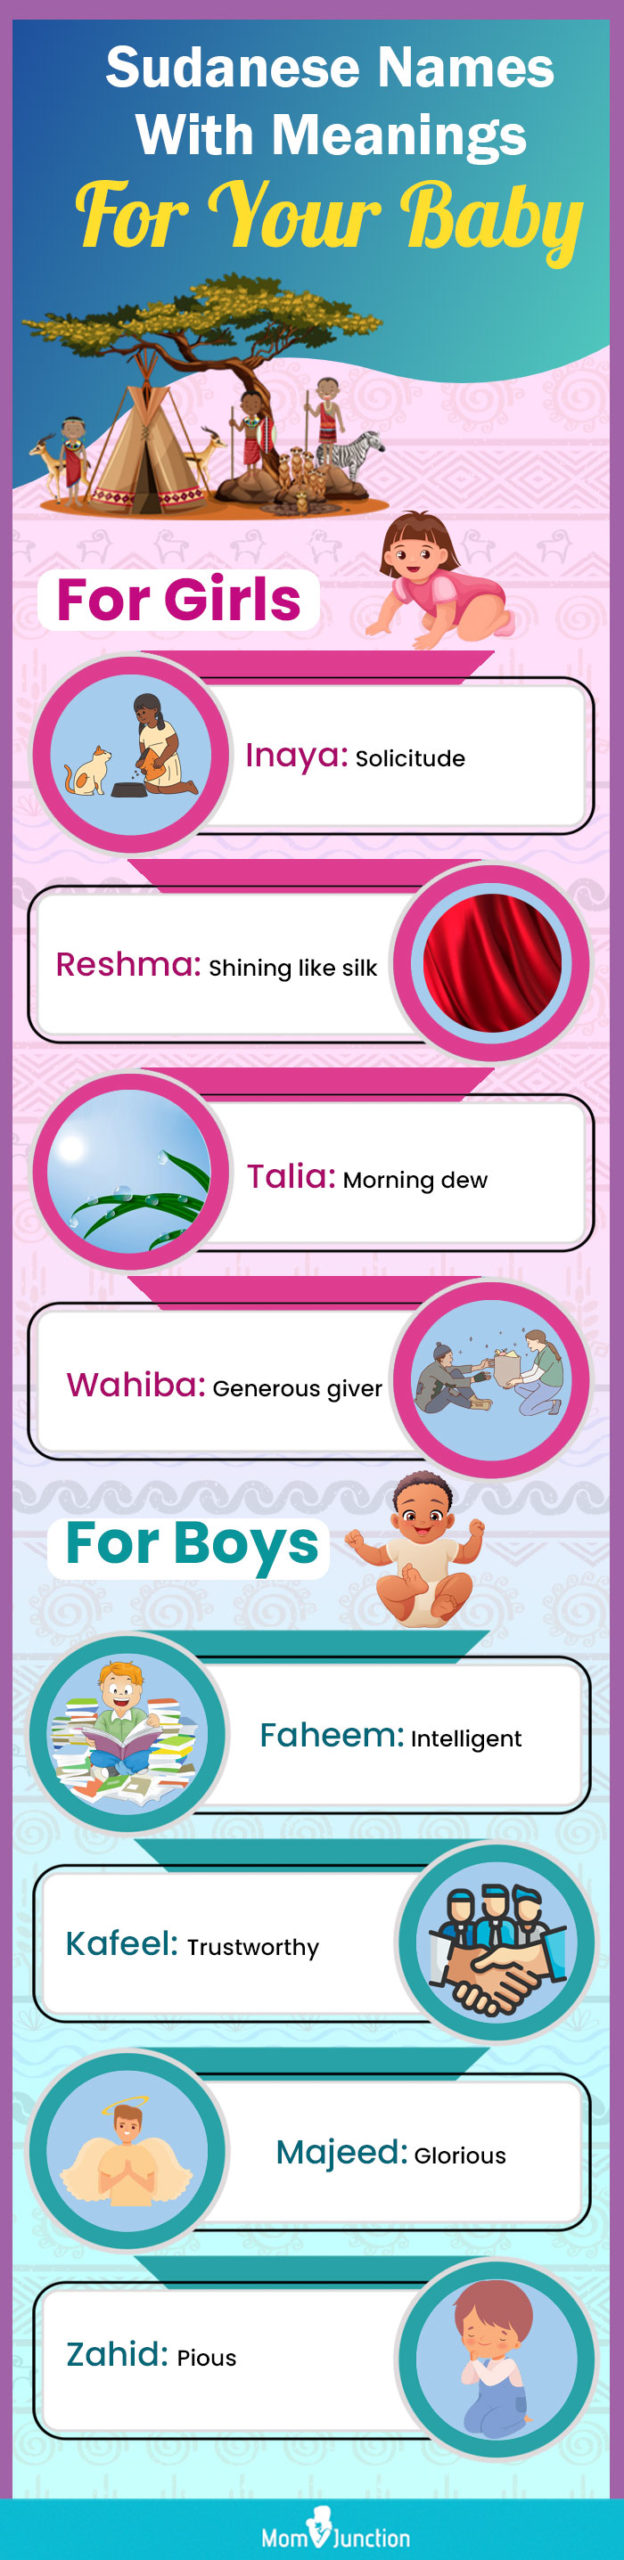 sudanese names with meanings for your baby (infographic)